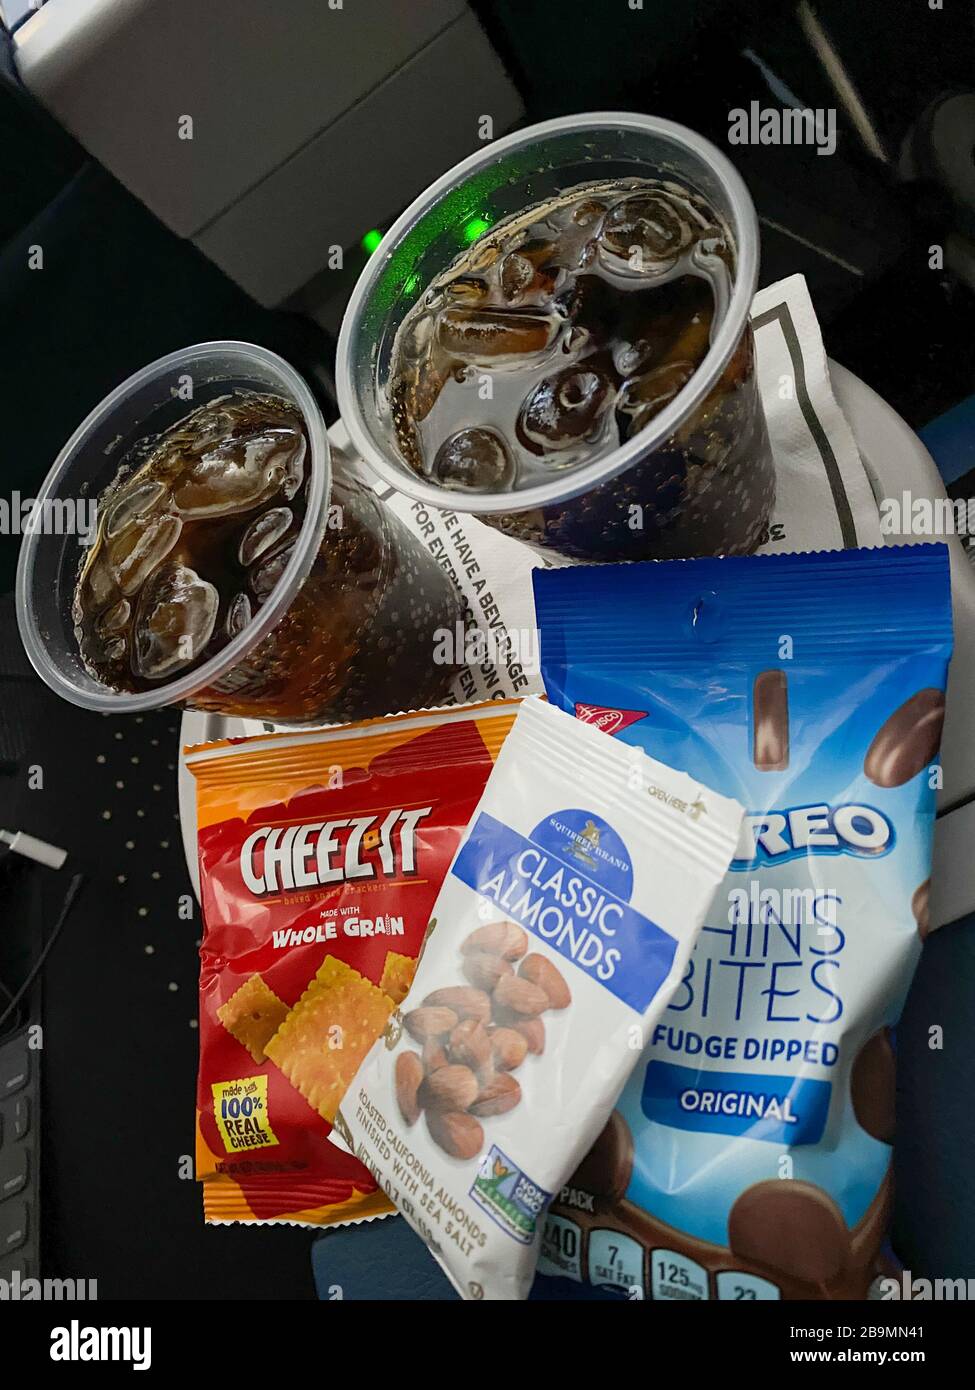 Orlando, FL/USA - 321/20: A drink and snack from a flight on Delta Airlines who are major American airline headquartered in Atlanta, GA. Stock Photo